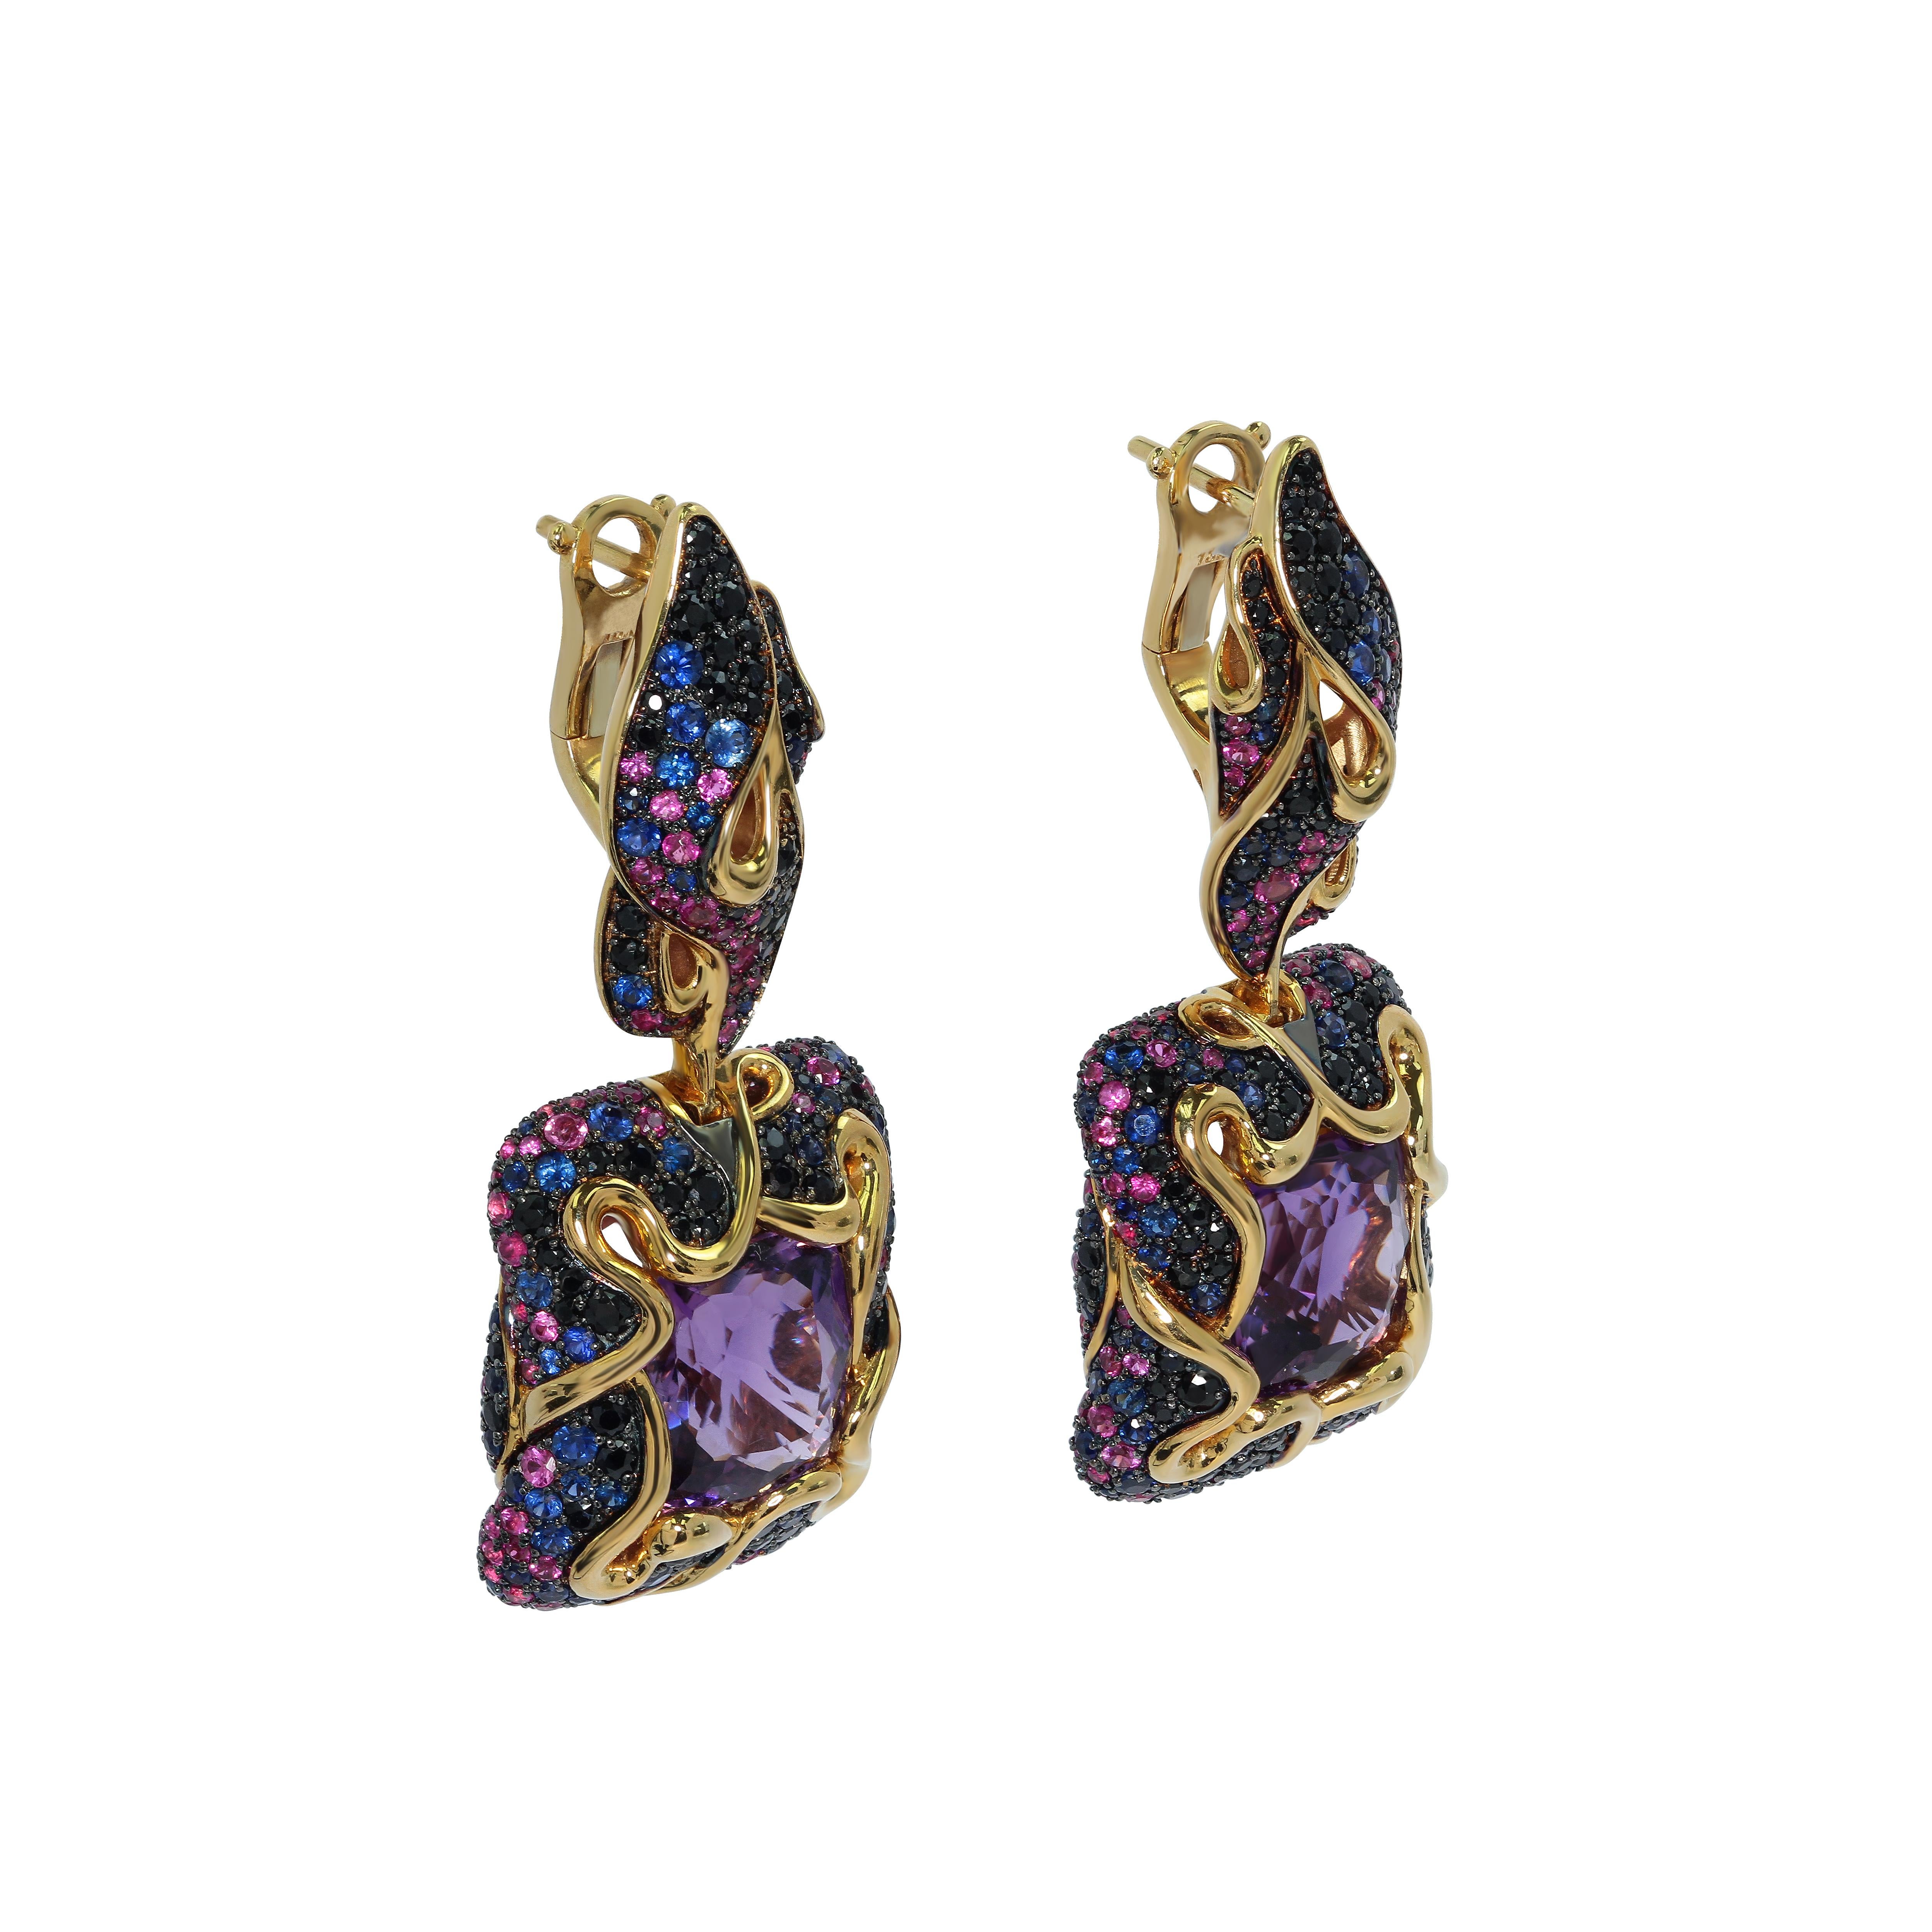 Amethyst 10.14 Carat Pink Blue Black Sapphire 18 Karat Yellow Gold Earrings
In early June in the gardens bloom luxurious flowers - peonies. Romance and mystery of peonies always attracted and allured artists. Our designers created these Earrings,